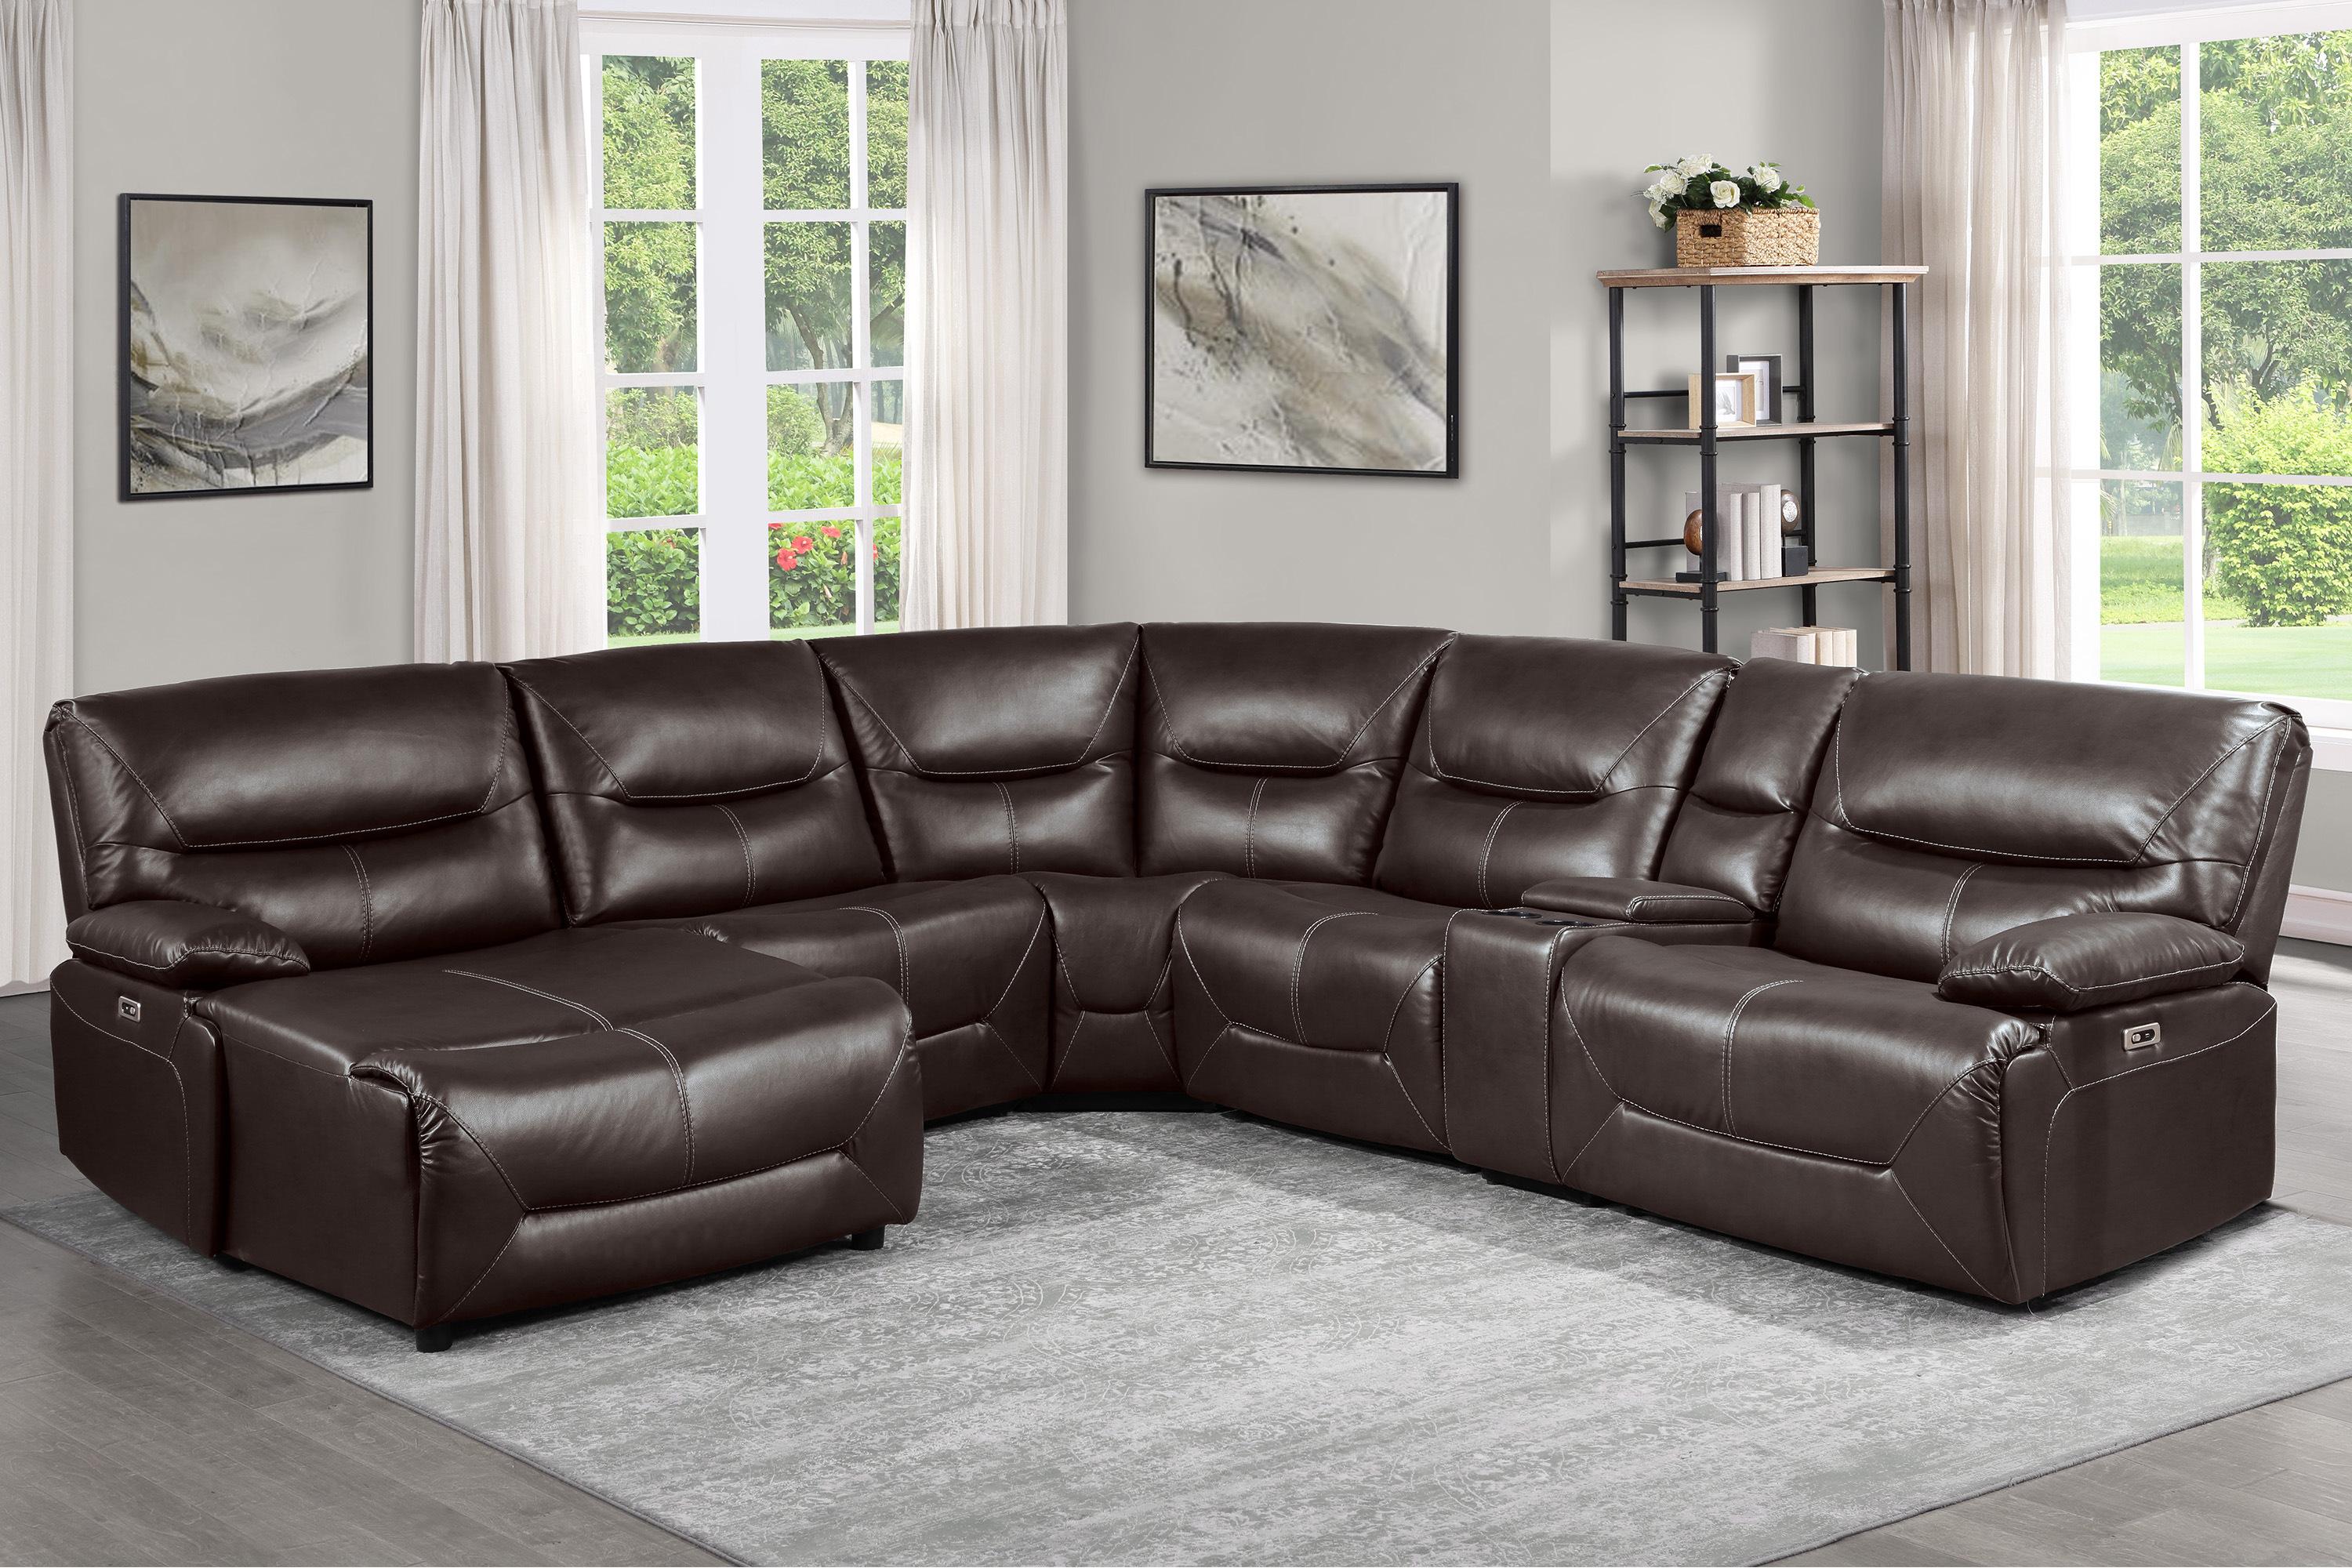 

    
Transitional Brown Faux Leather 6-Piece LSF Power Reclining Sectional Homelegance 9579BRW Dyersburg
